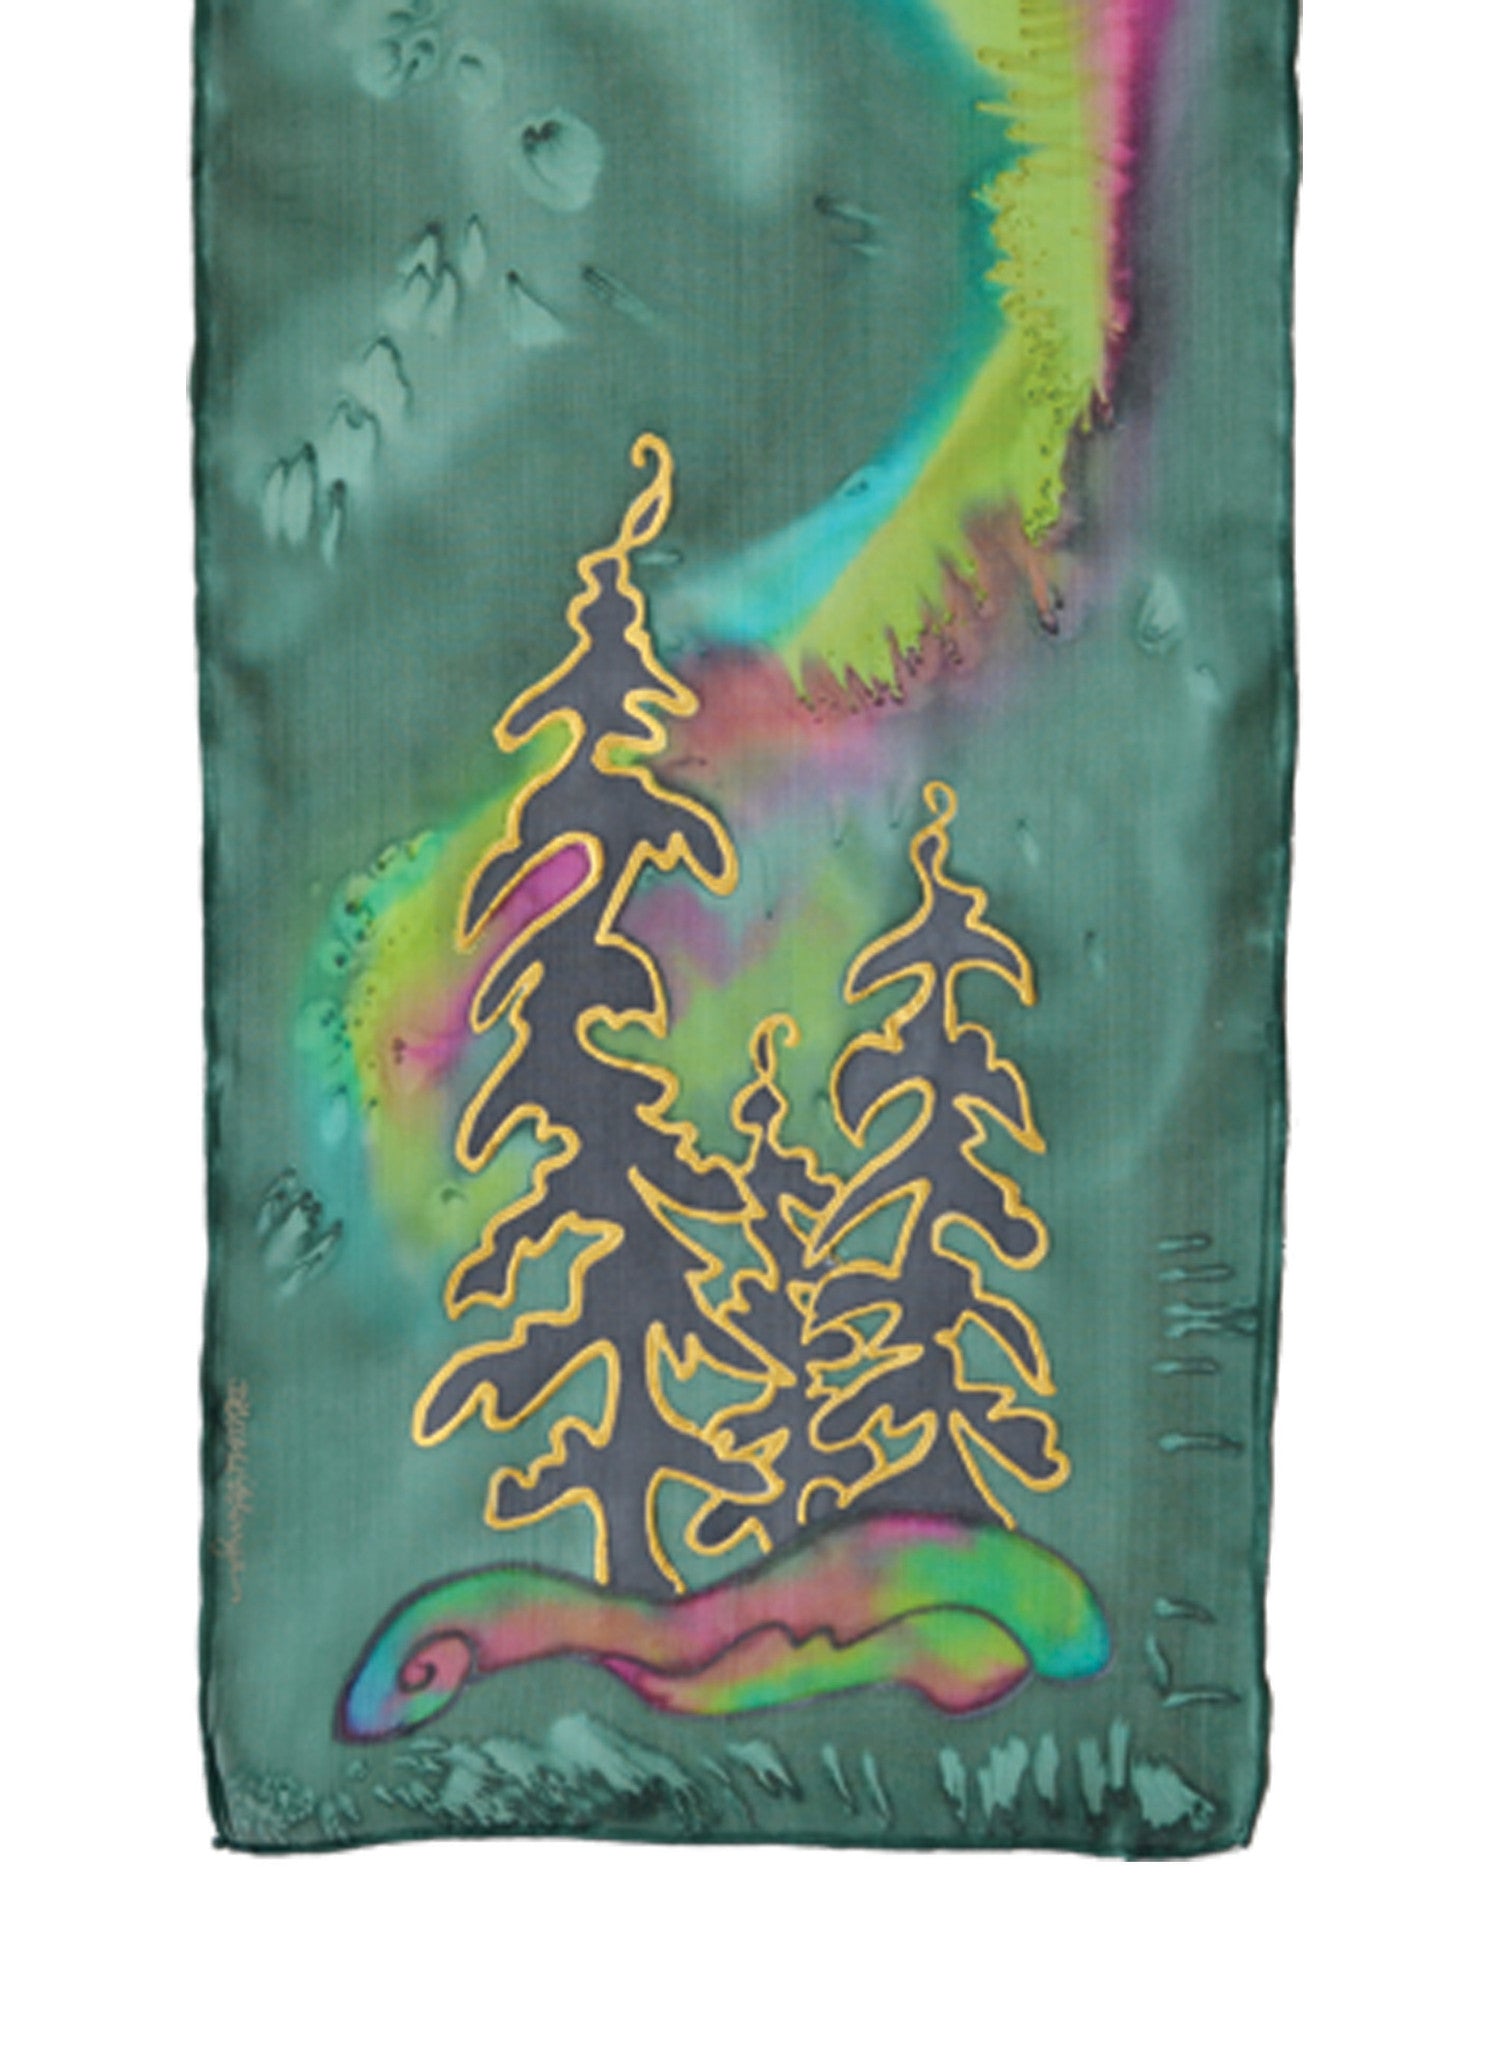 Hand-painted silk scarf northern lights design tree design purple and green